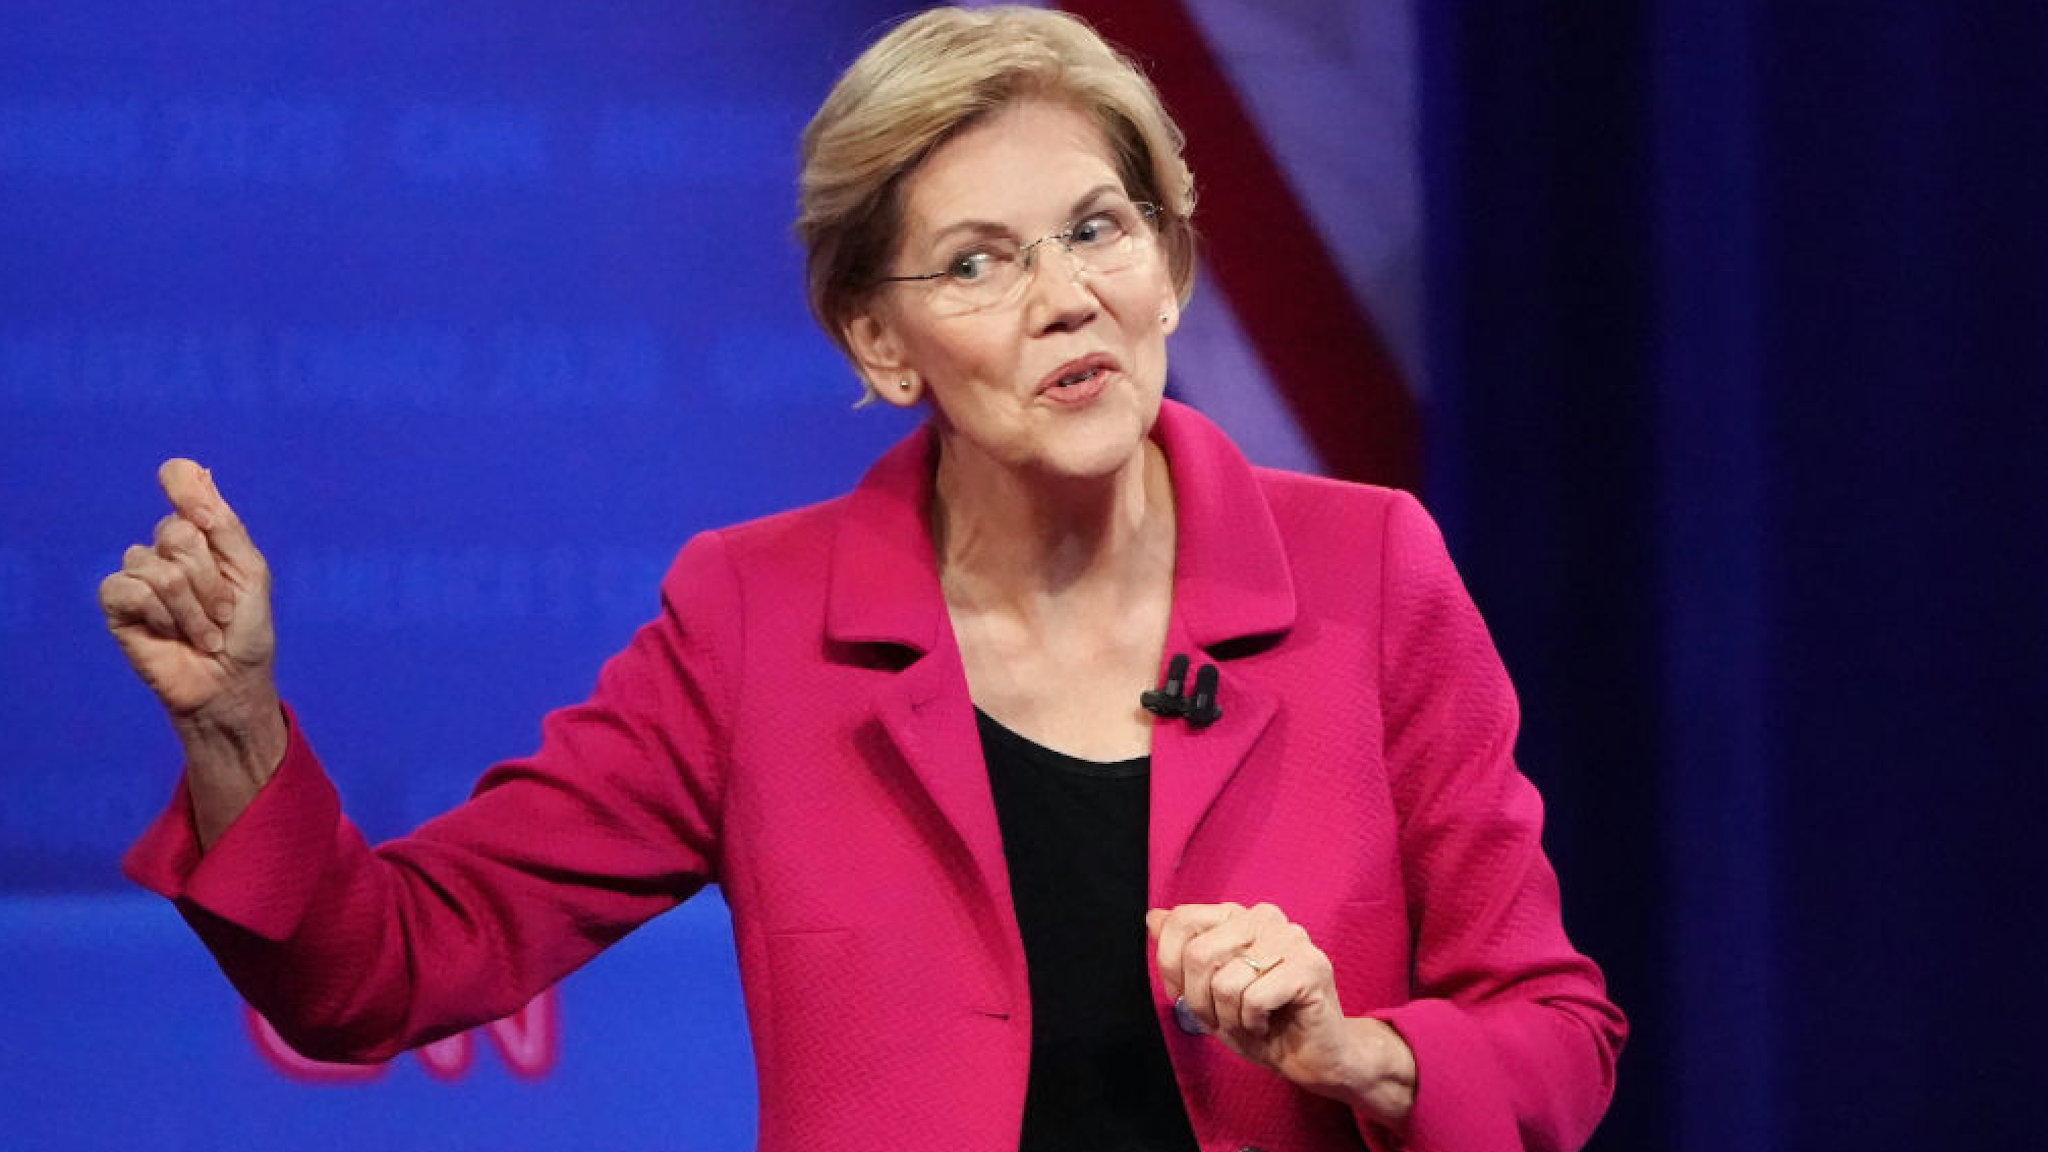 Democratic presidential candidate, Sen. Elizabeth Warren (D-MA) speaks at the Human Rights Campaign Foundation and CNN presidential town hall focused on LGBTQ issues on October 10, 2019 in Los Angeles, California.